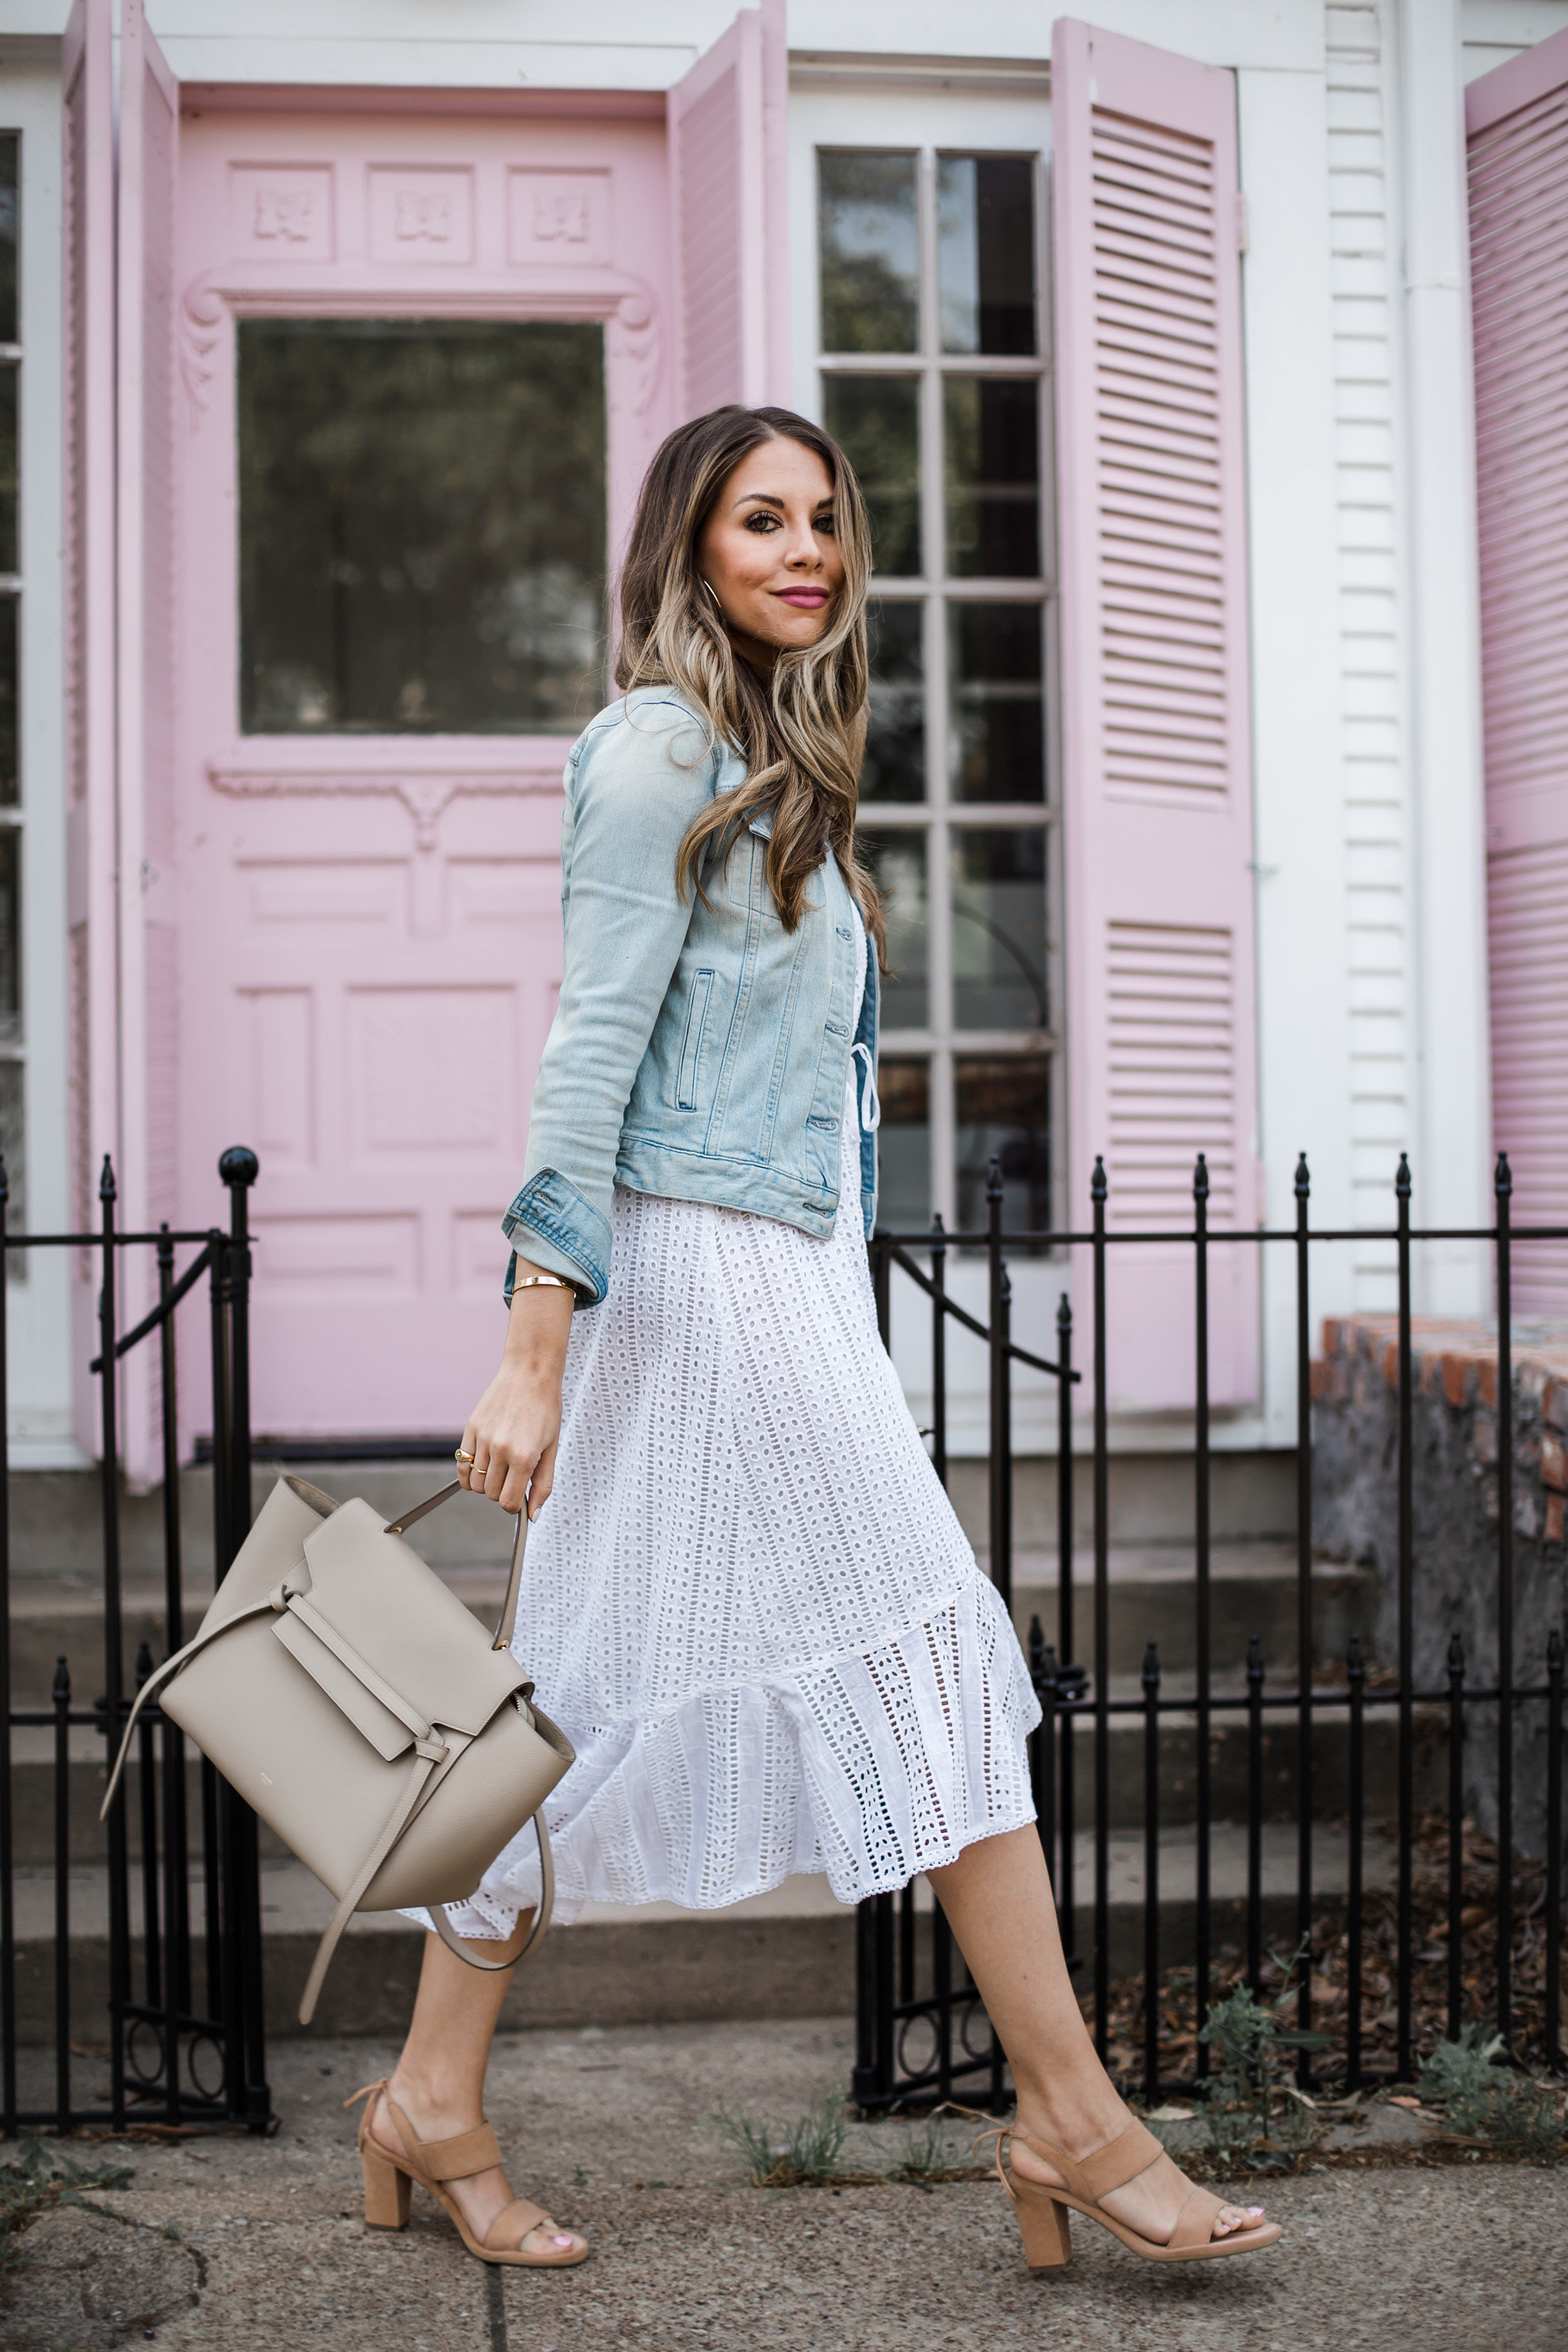 white dress and denim jacket outfit